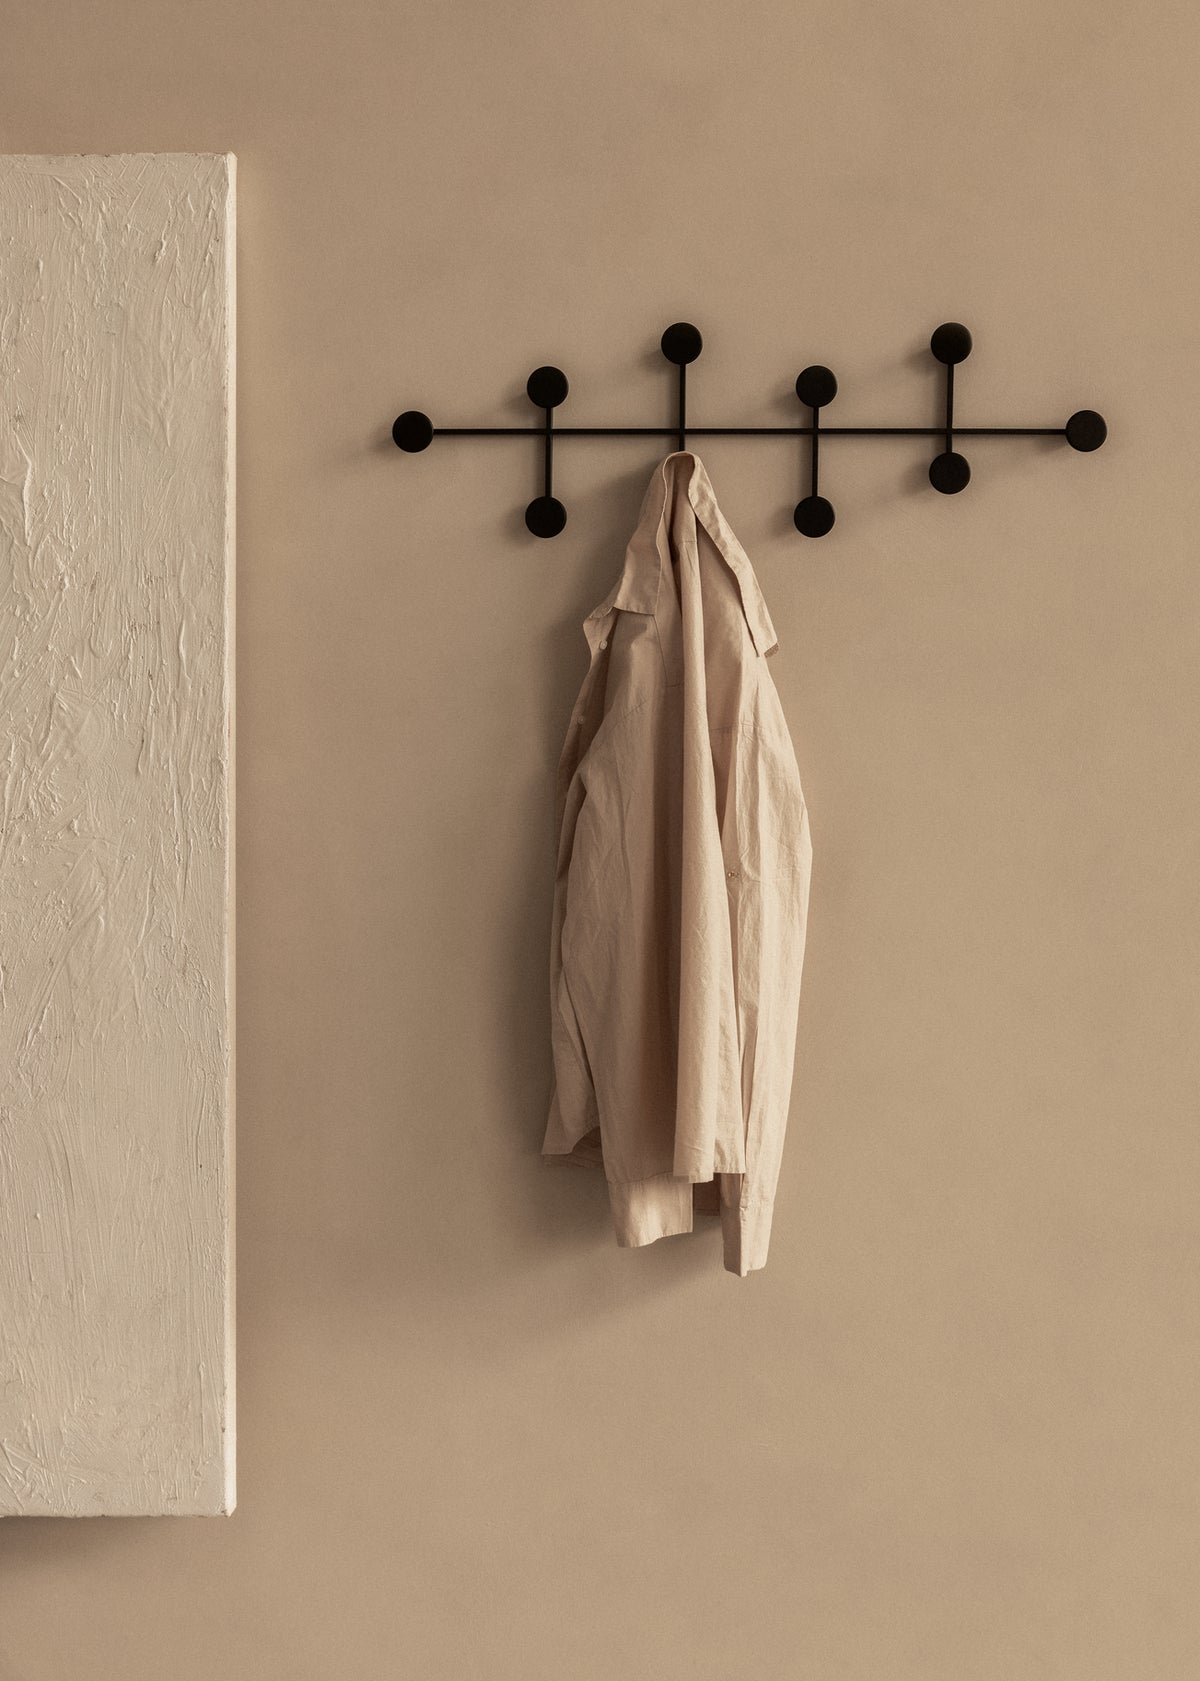 Coat Hook Rack with 3 Square Hooks - Premium Modern Wall Mounted - Ultra Durable with Solid Steel Construction, Brushed Stainless Steel Finish, Super